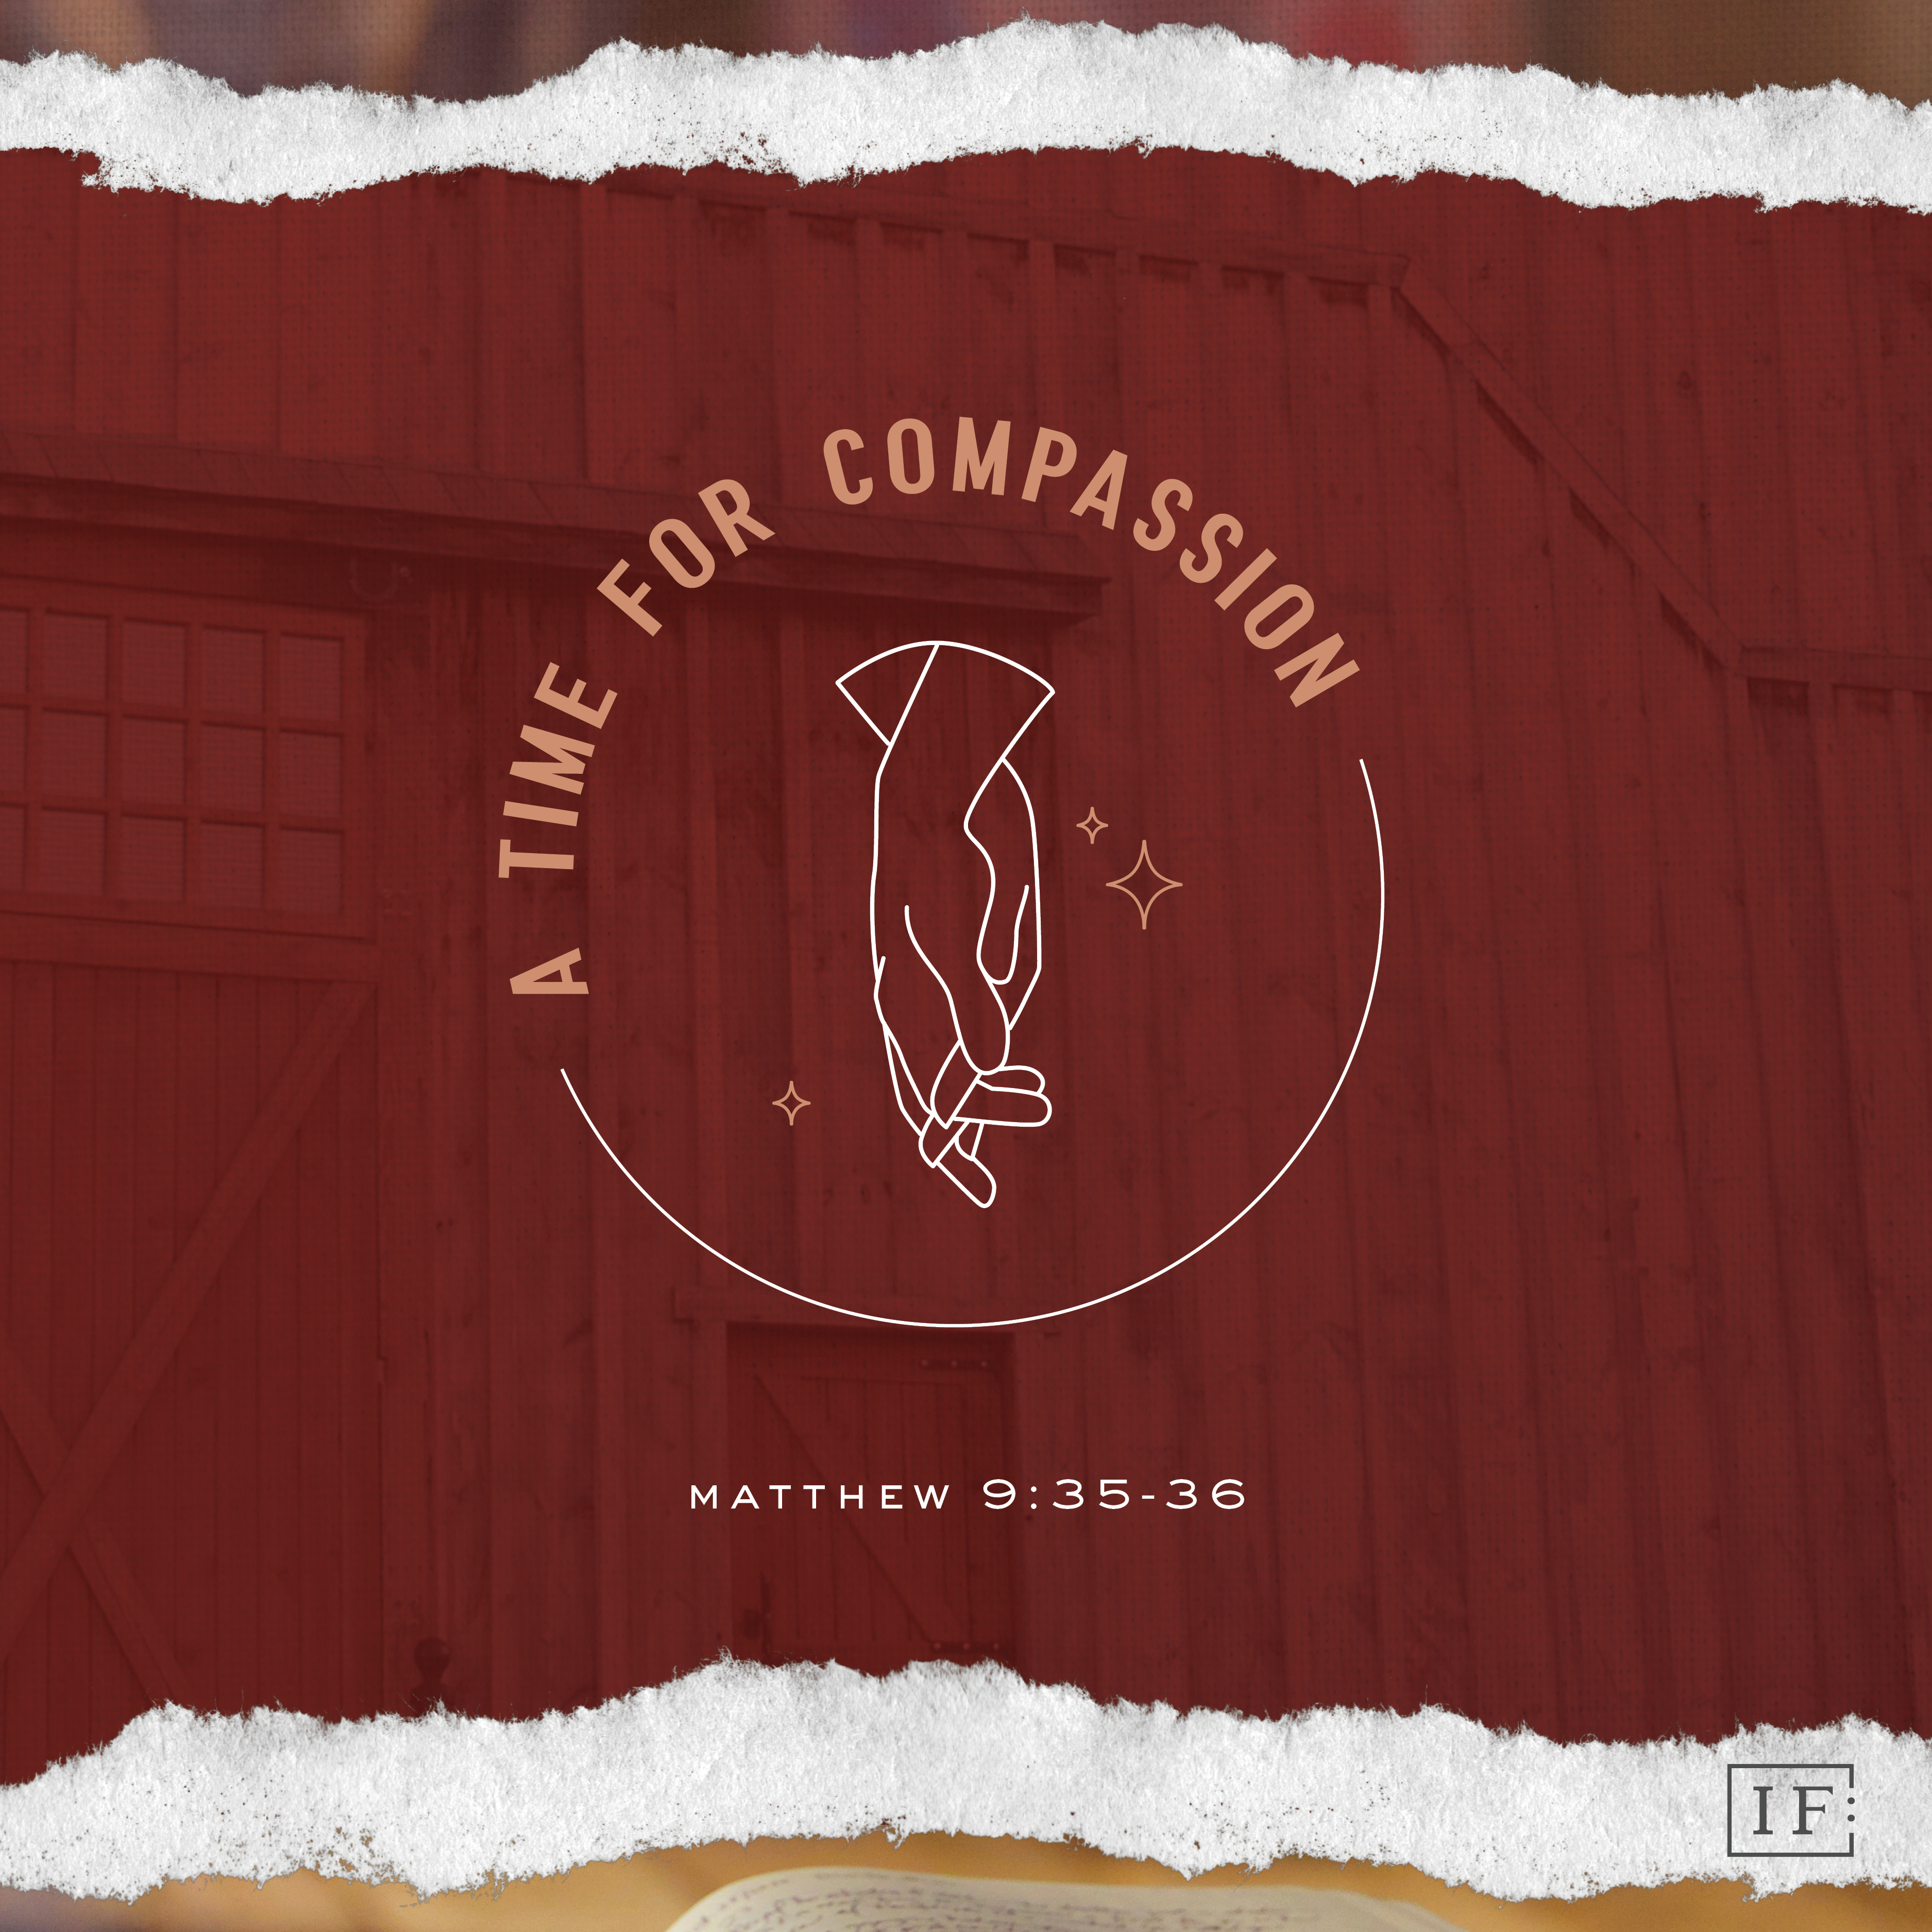 A Time for Compassion Book Cover